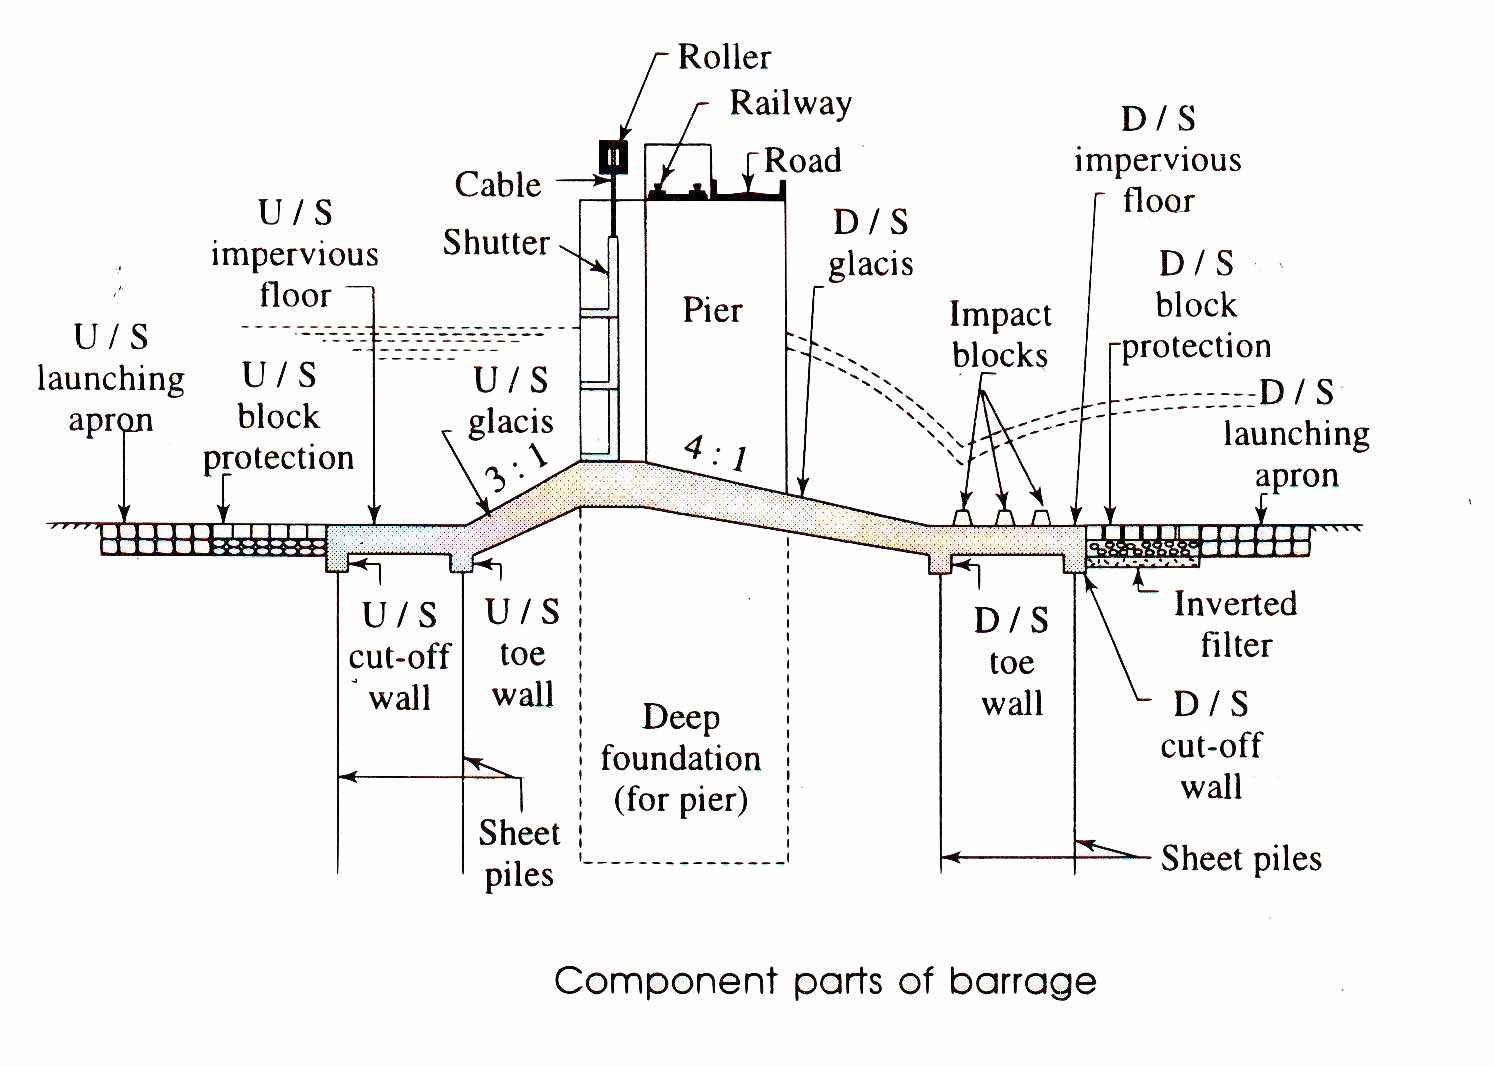 Components of Barrage